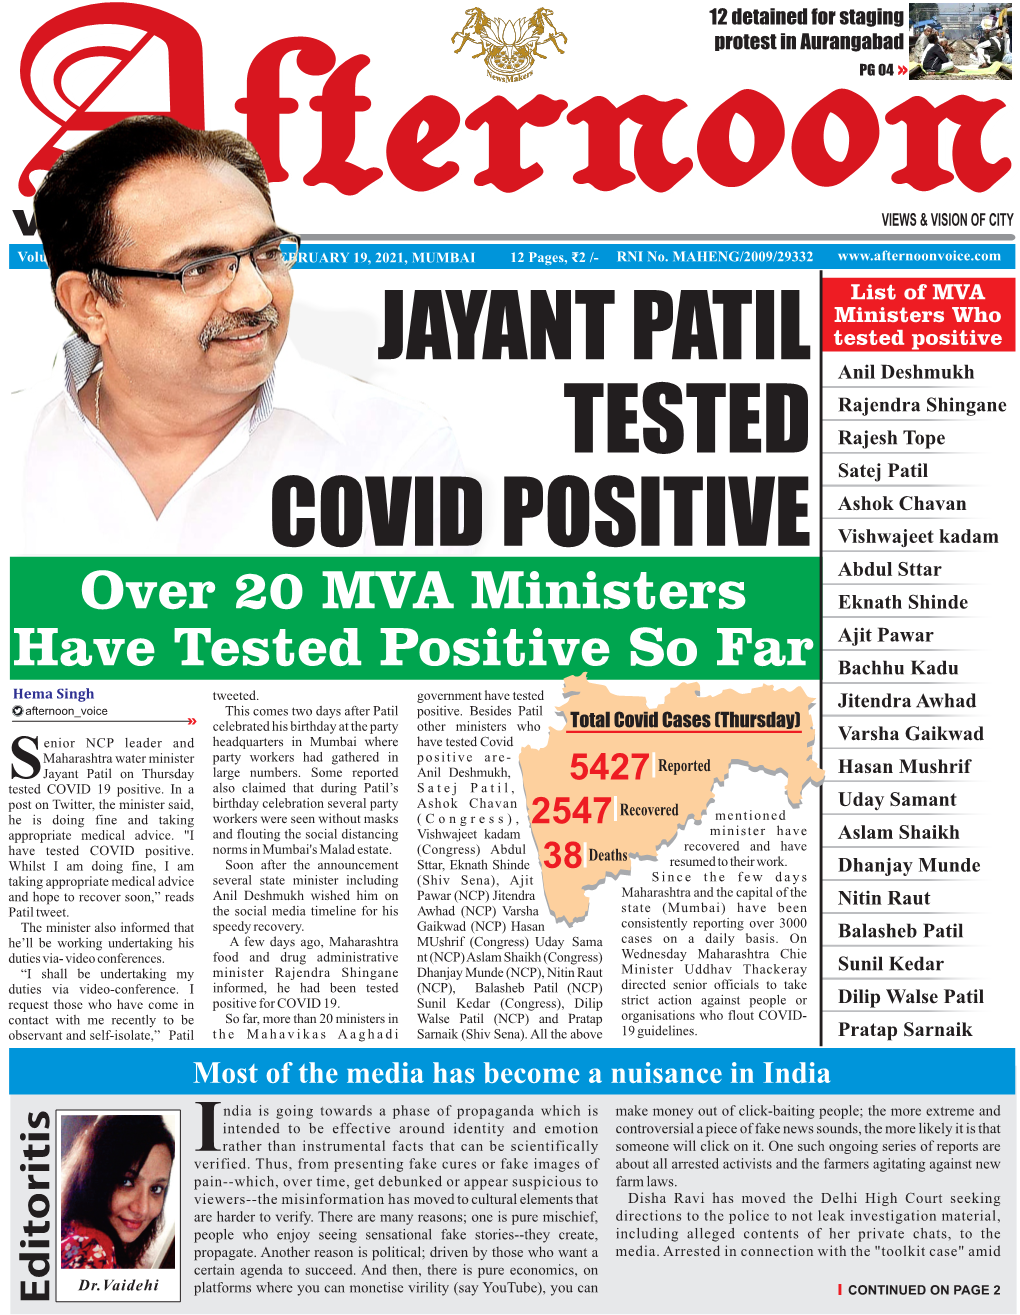 Jayant Patil Tested Covid Positive